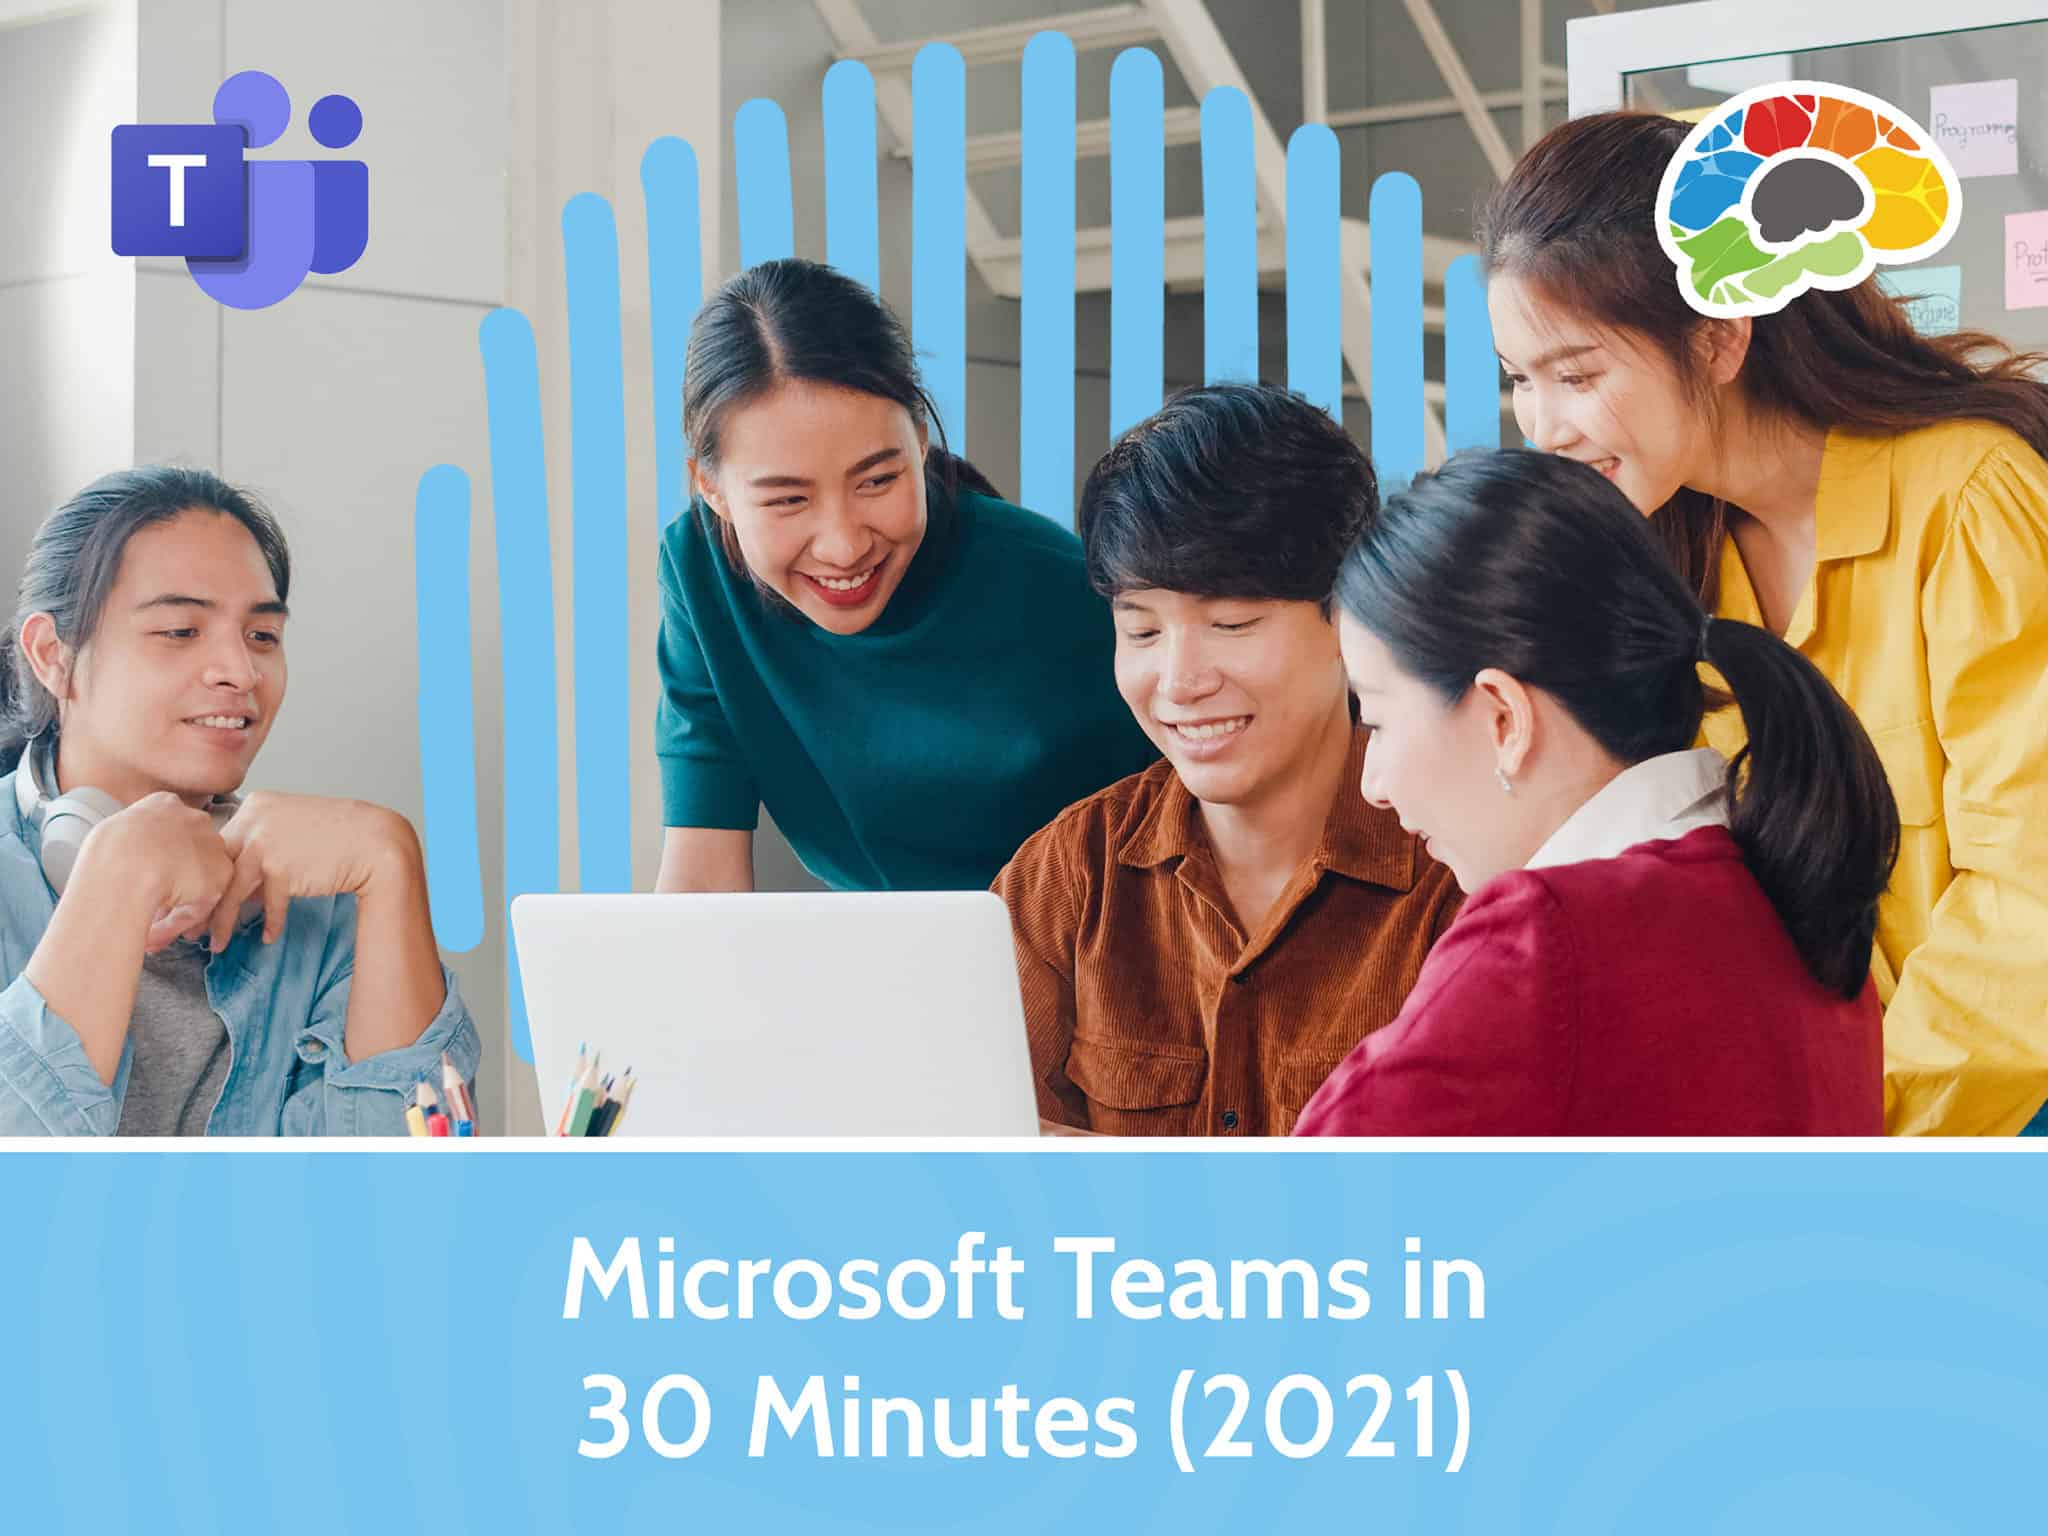 Microsoft Teams in 30 Minutes 2021 scaled